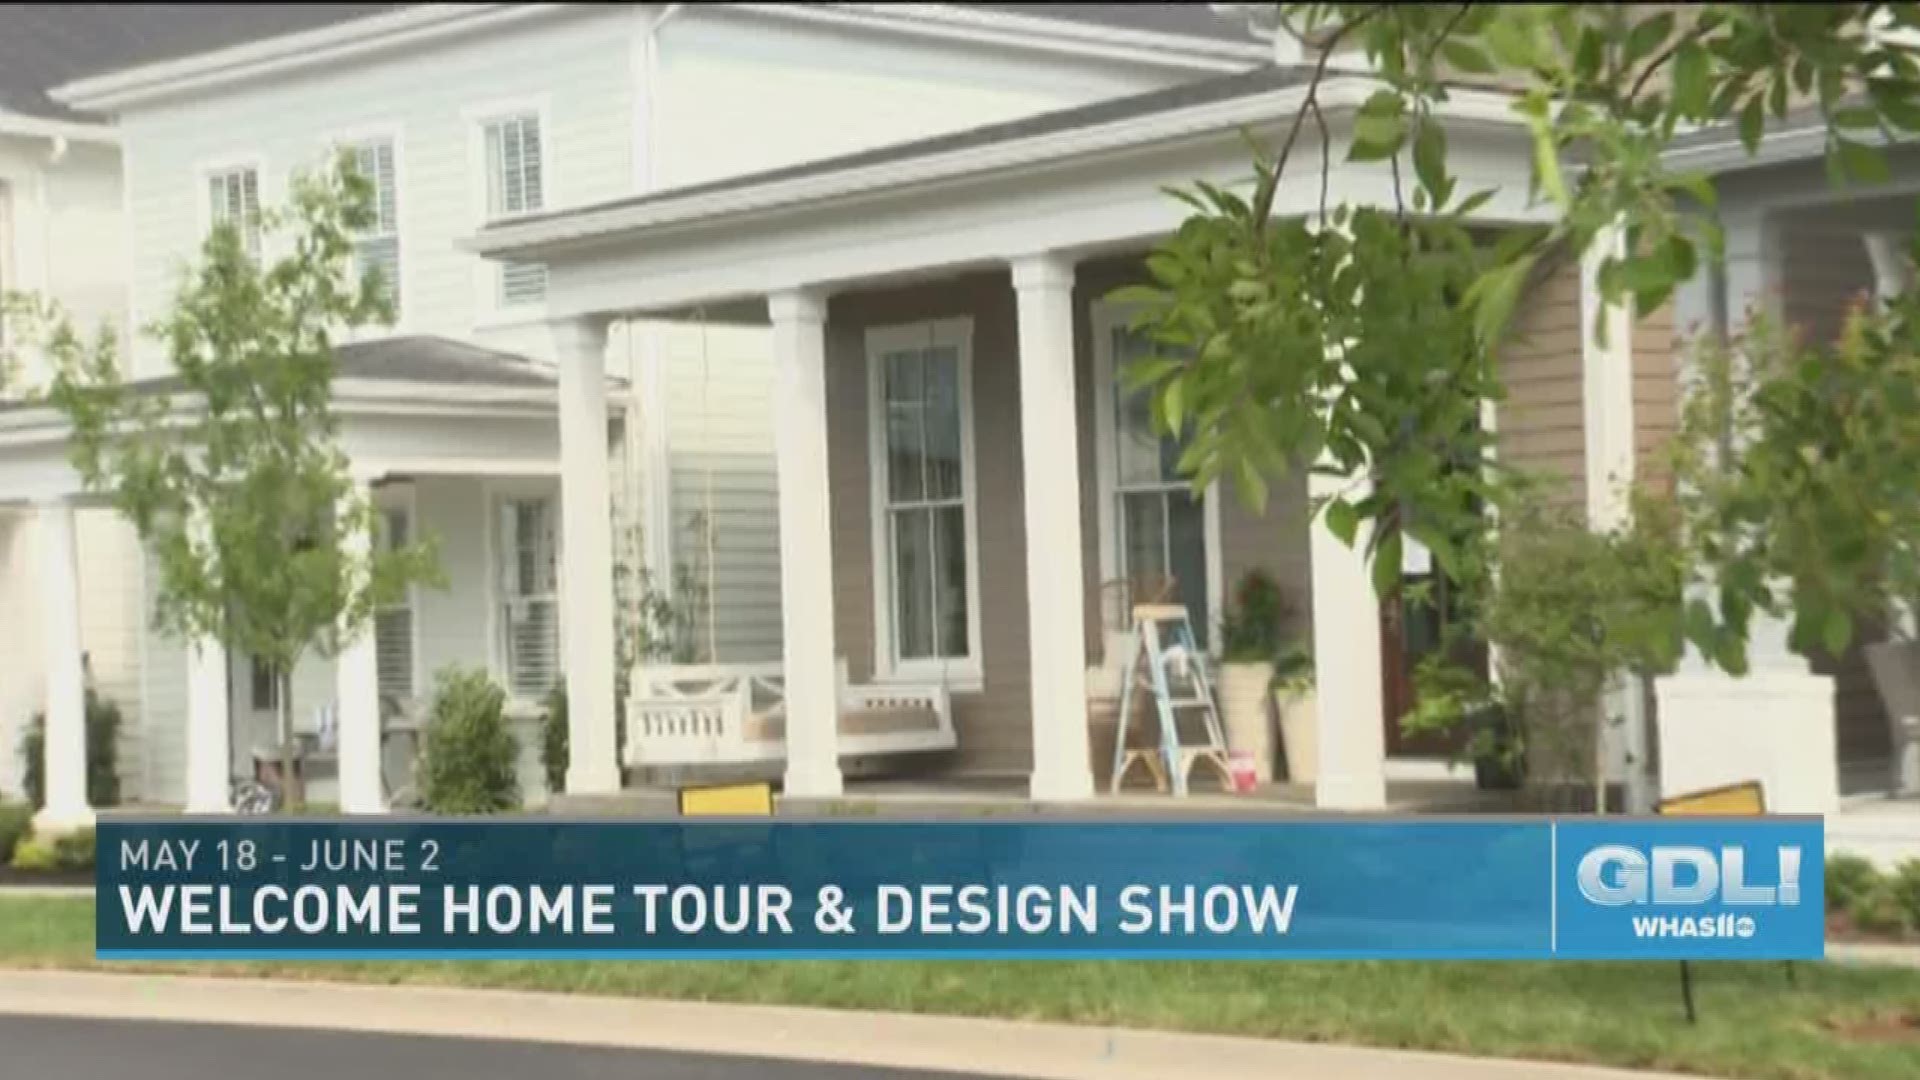 You can take the Norton Commons Welcome Home Tour and check out designs by Summer Classics May 18 through June 2, 2019.